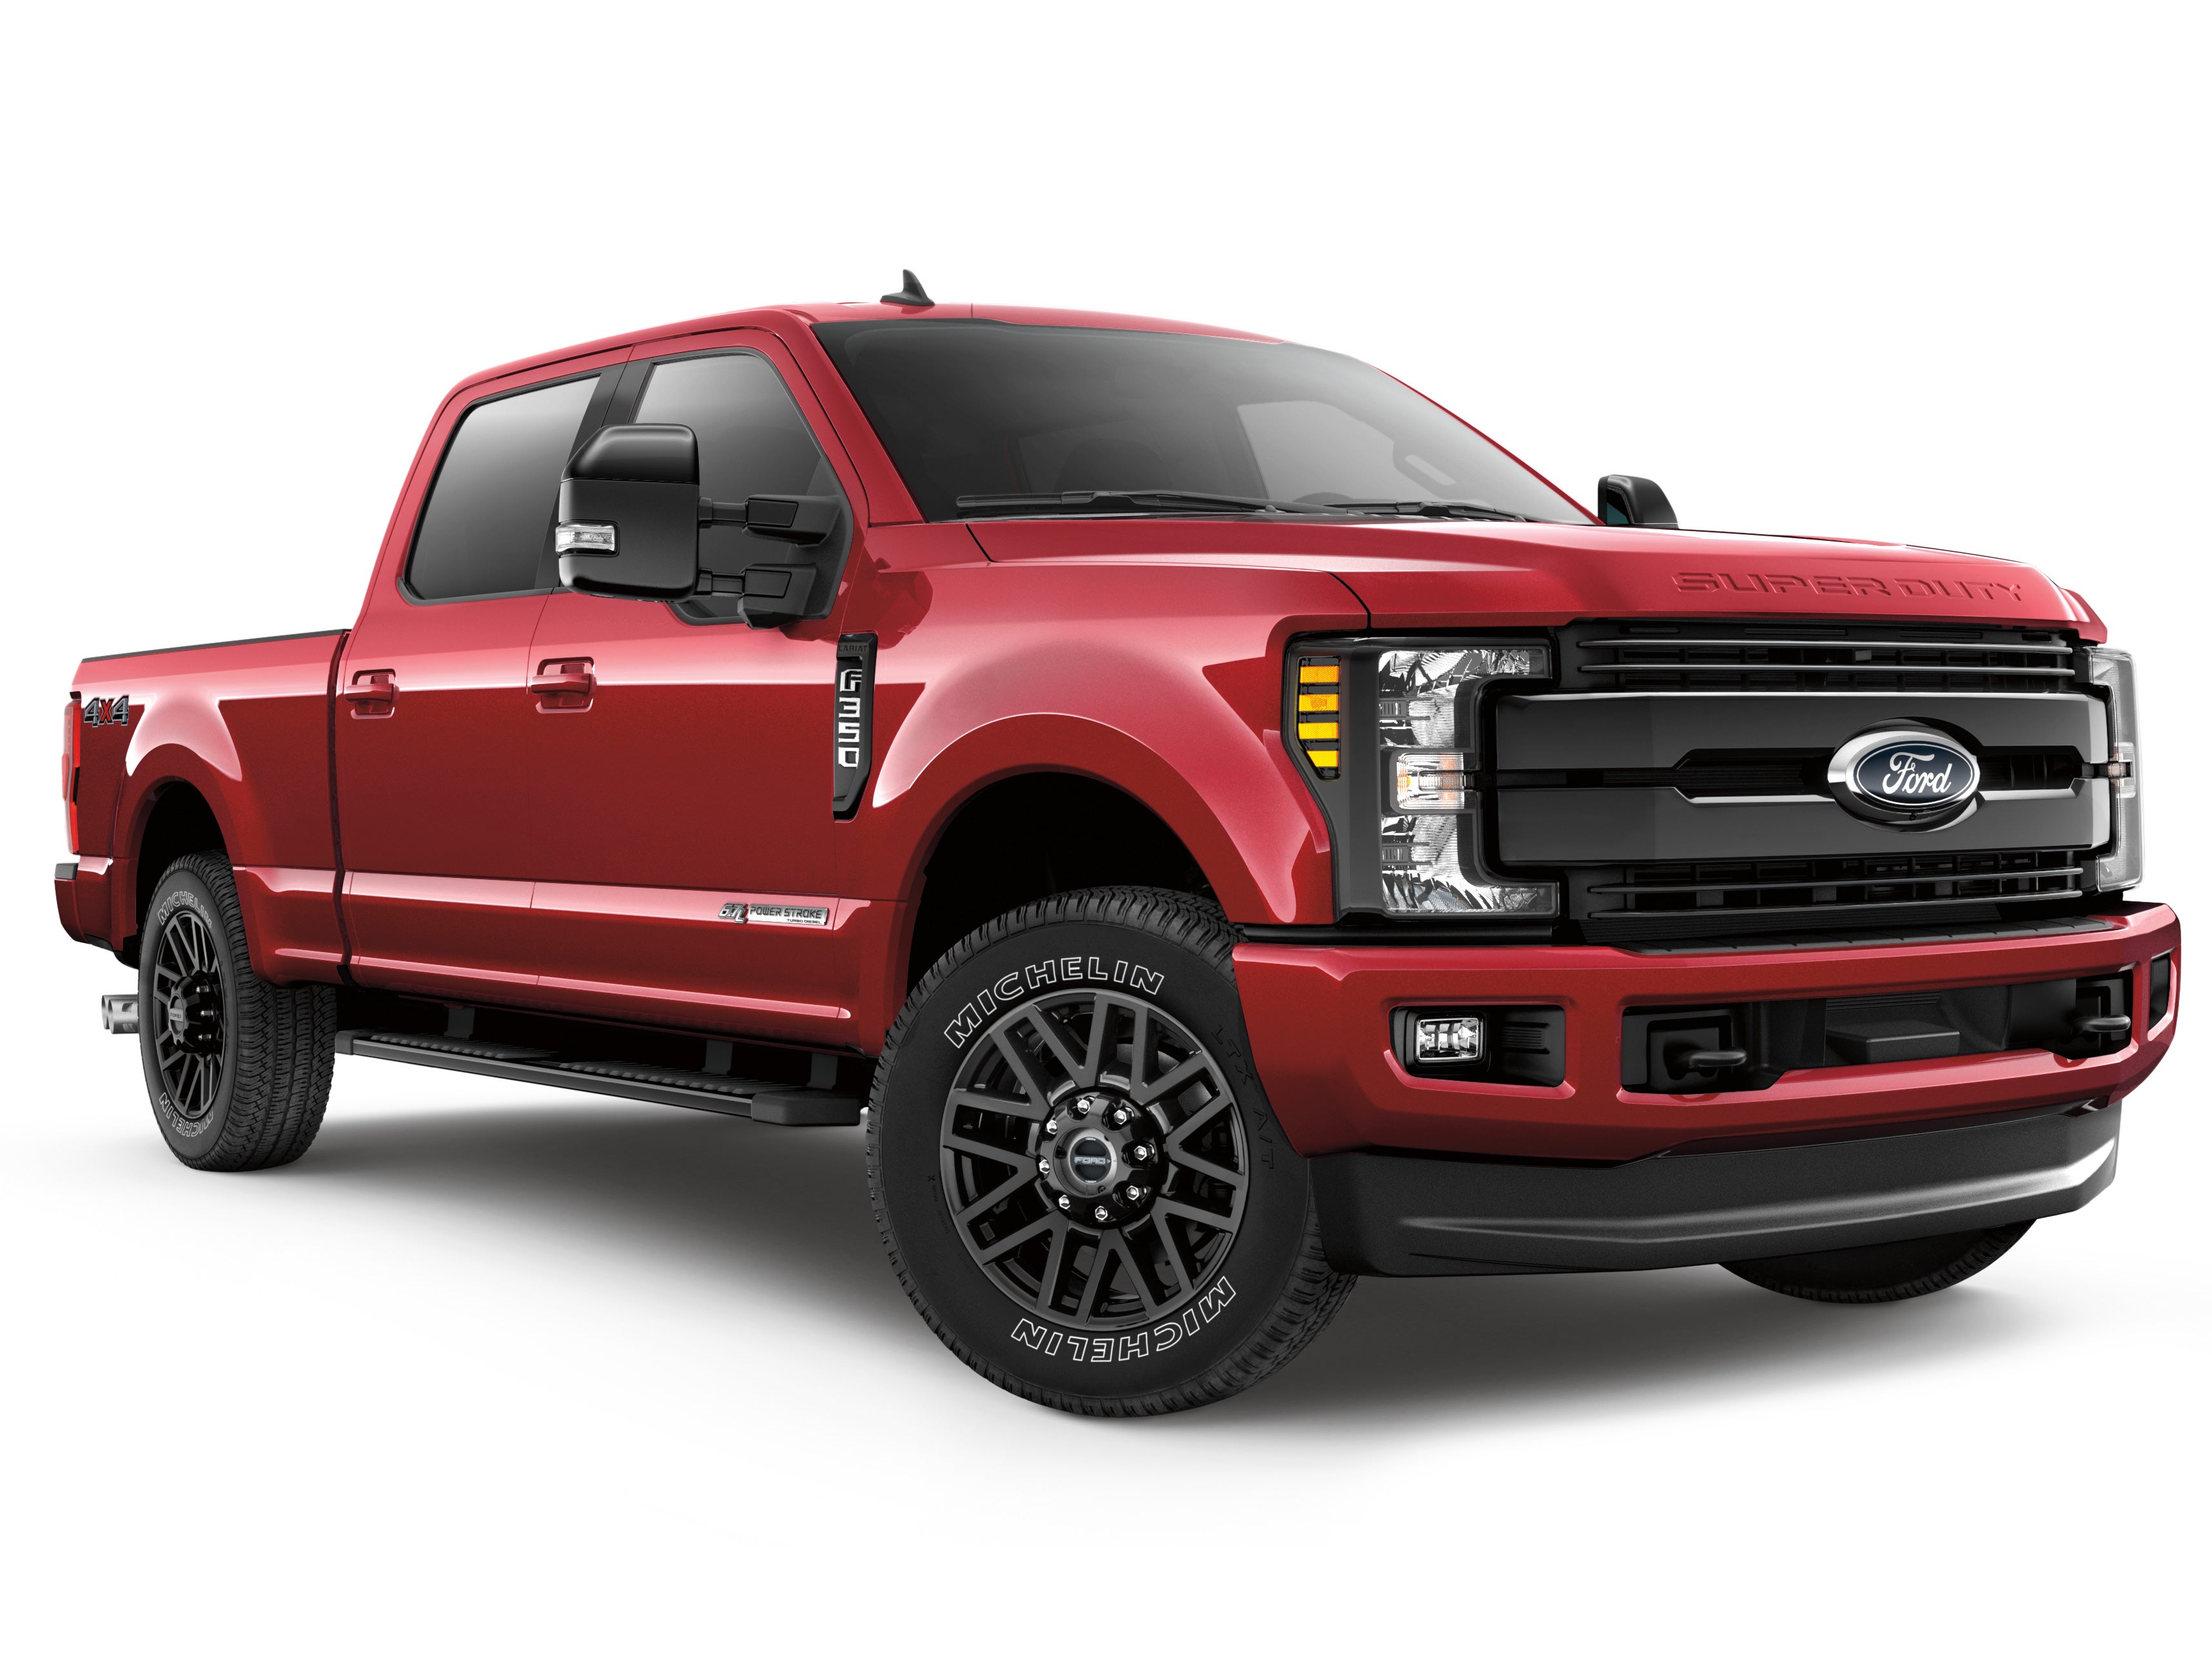 The 2019 Ford Super Duty is available at Waldorf Ford near Alexandria